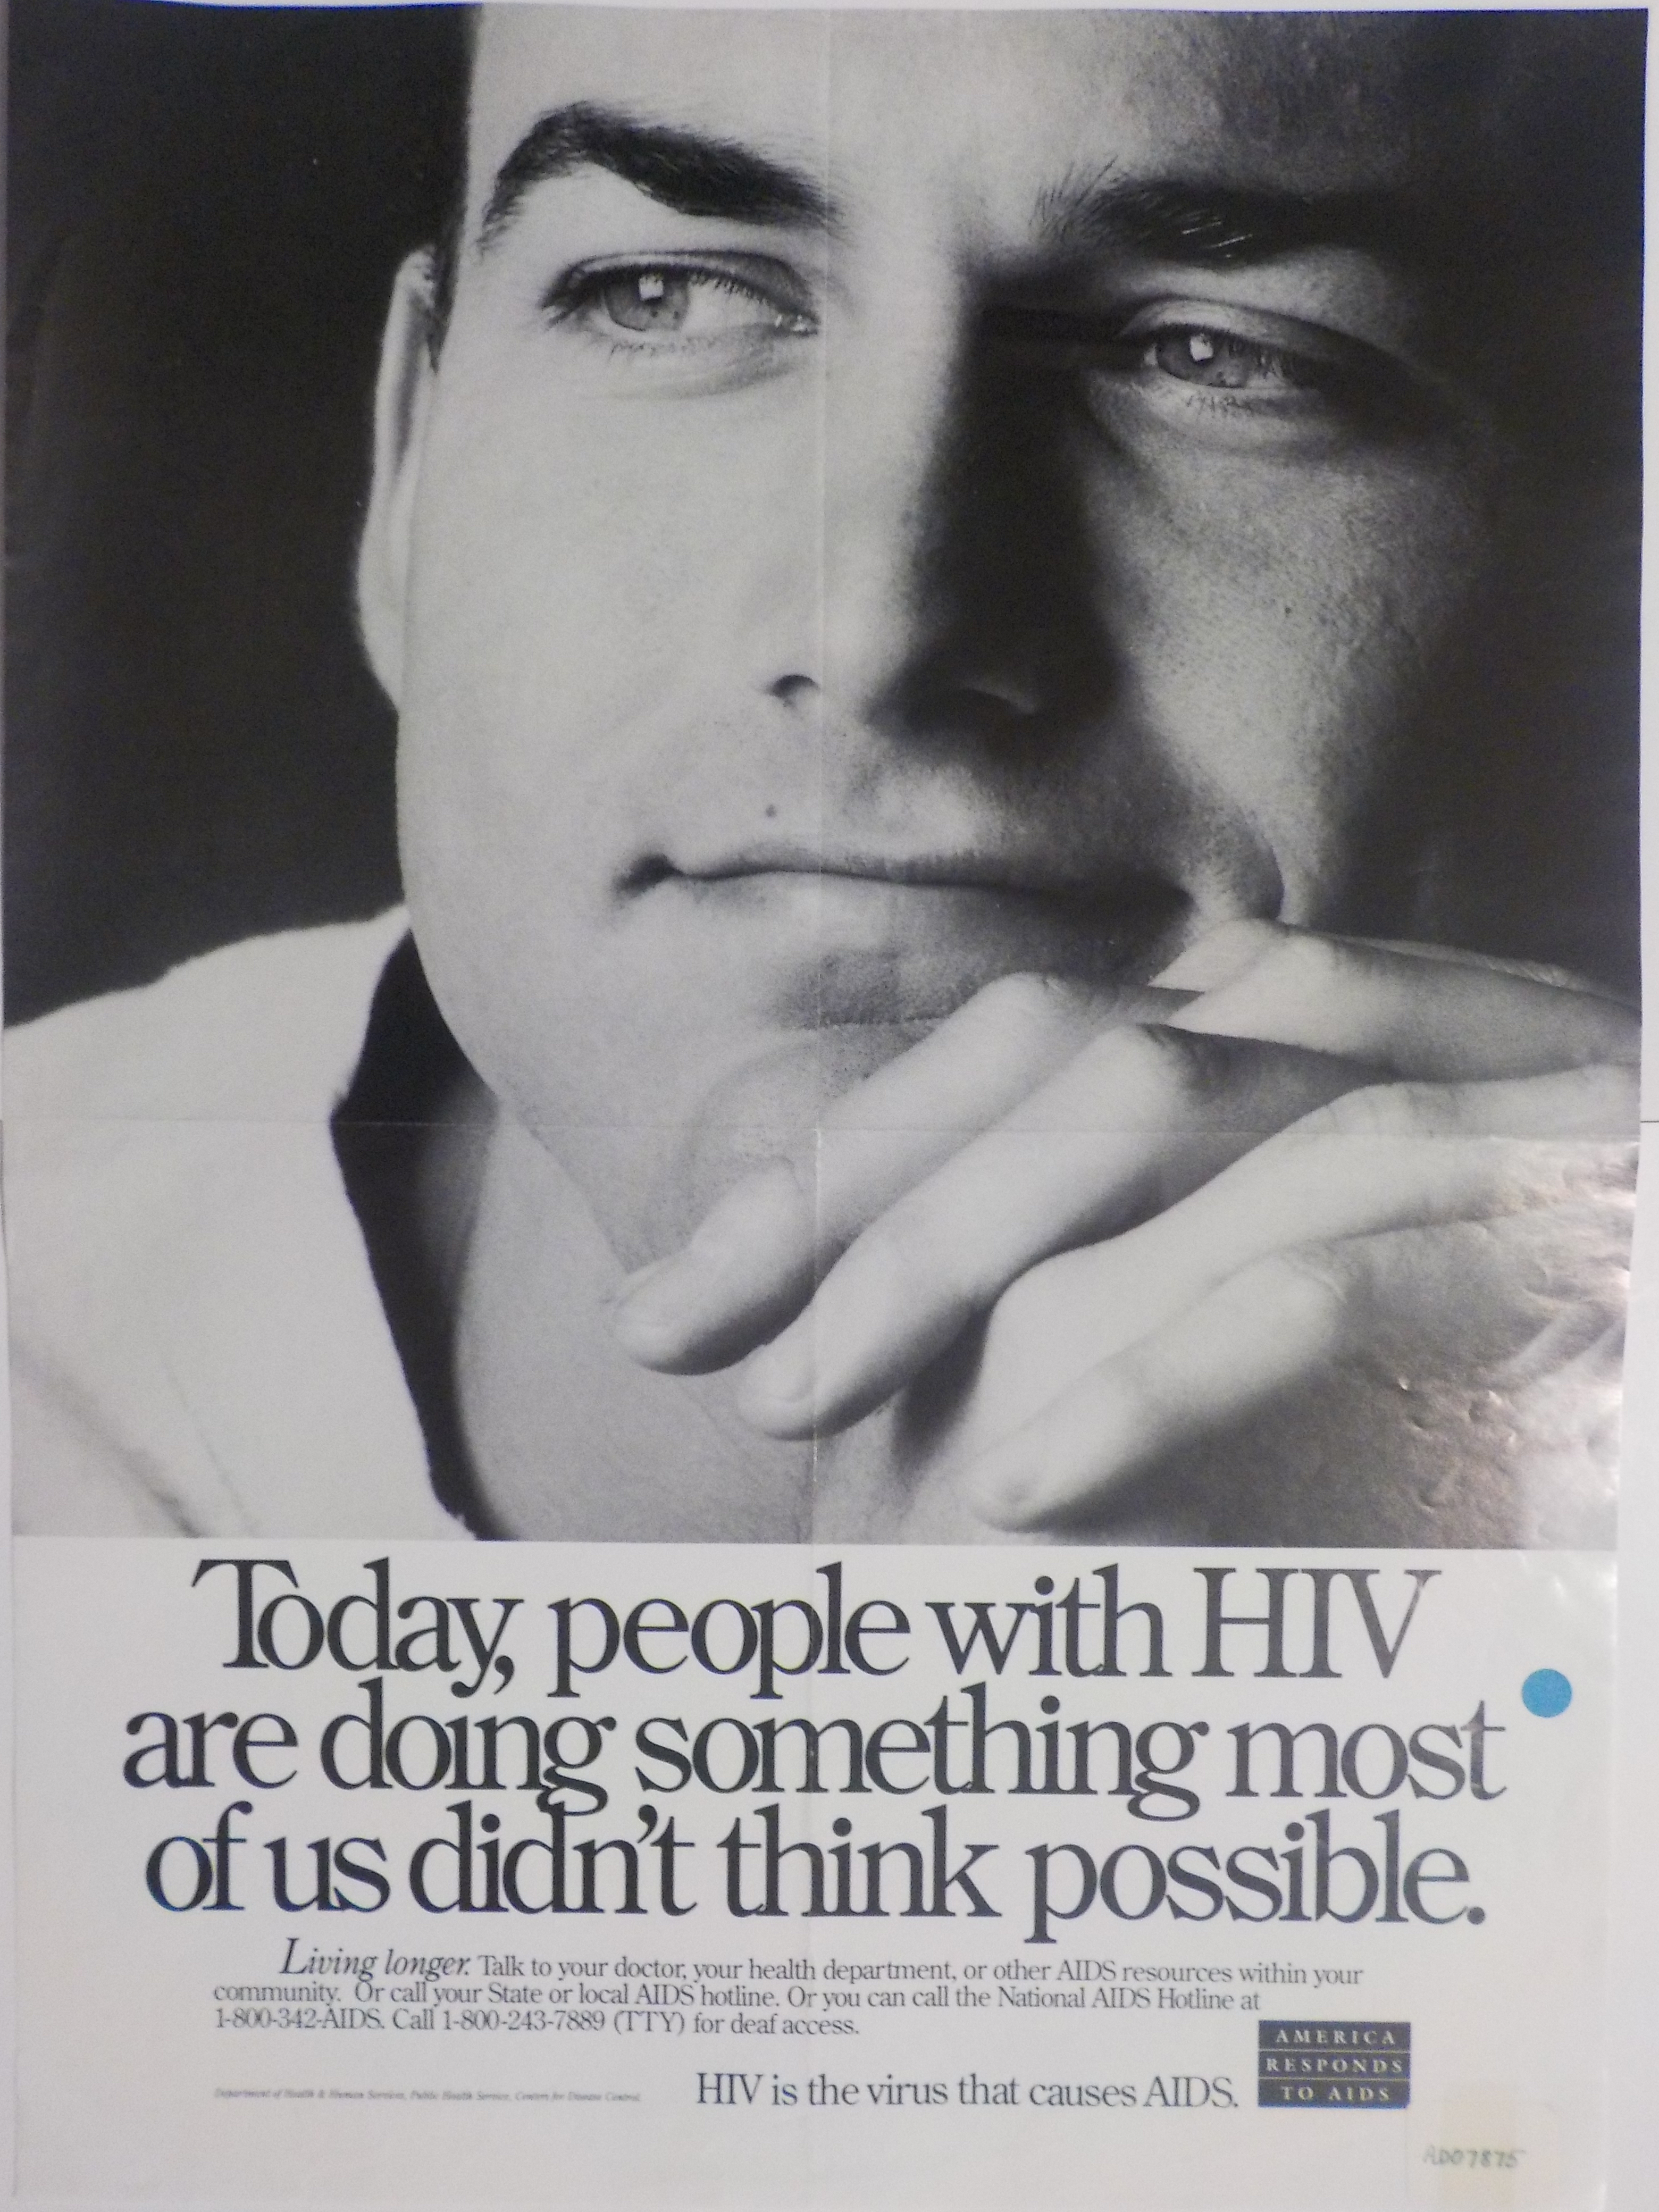 Today, people with HIV are doing something most of us didn't think was possible